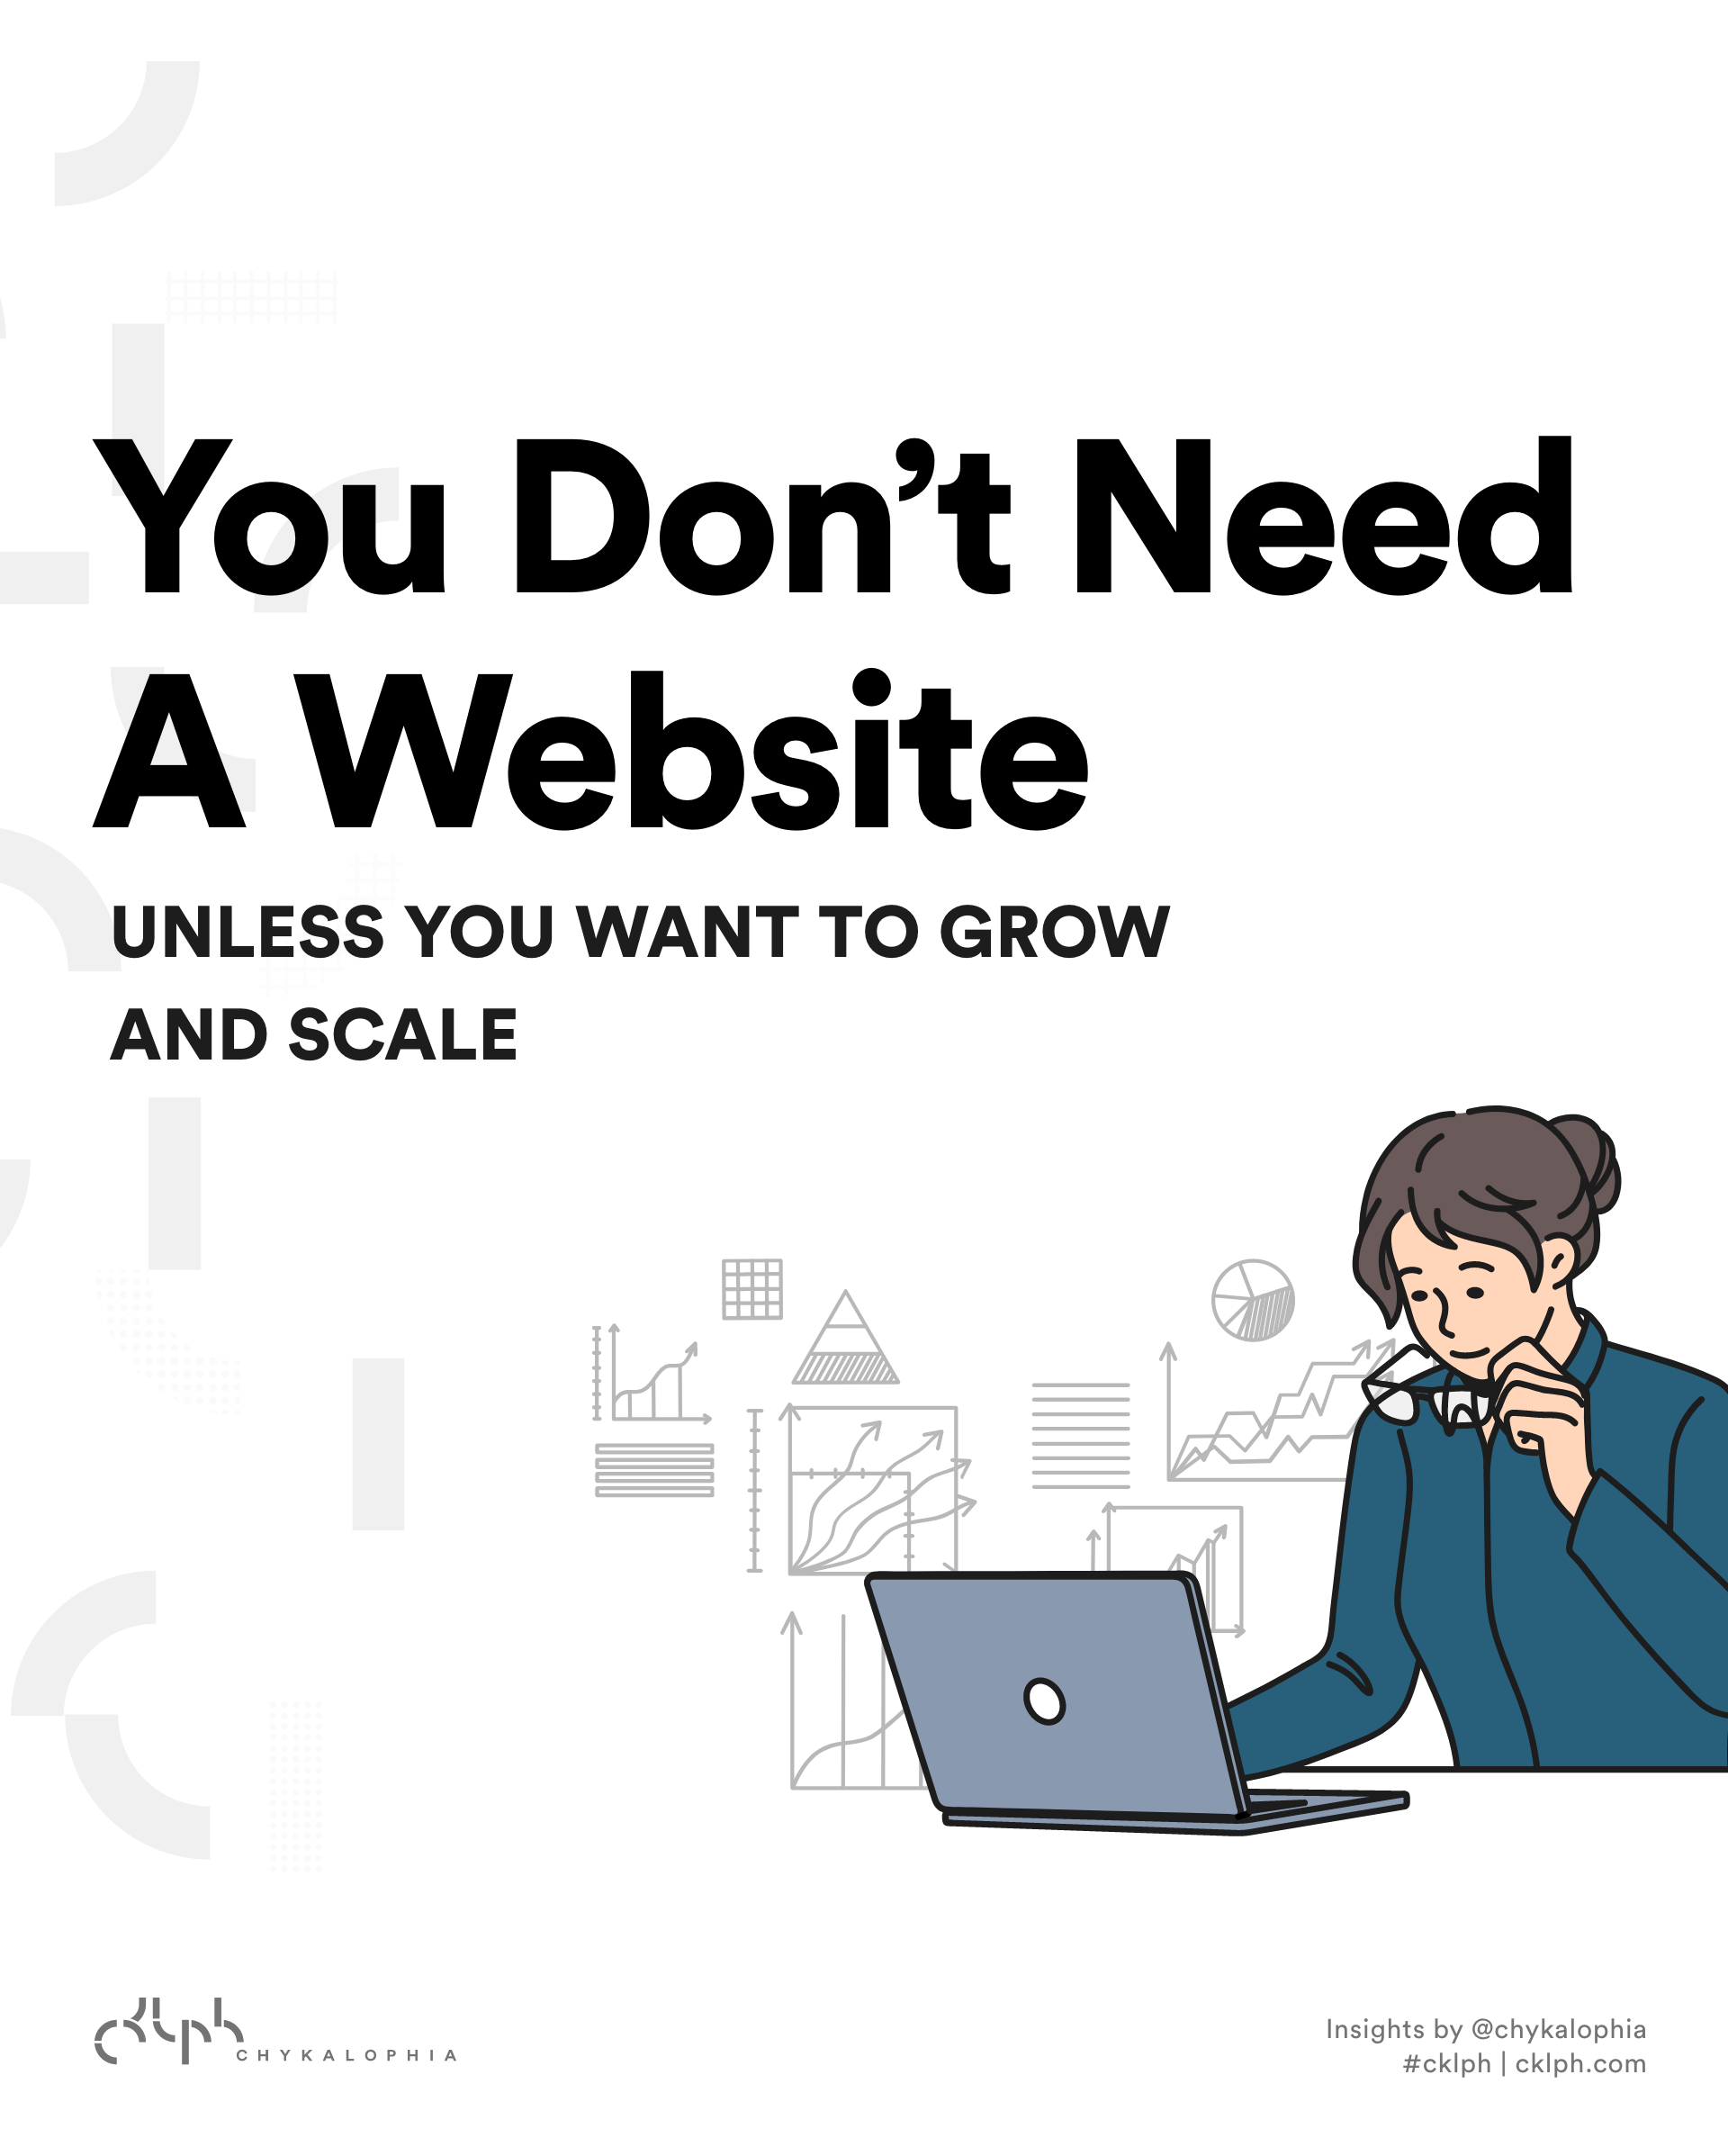 You Don’t Need A Website for Business (Unless You Want to Grow & Scale)